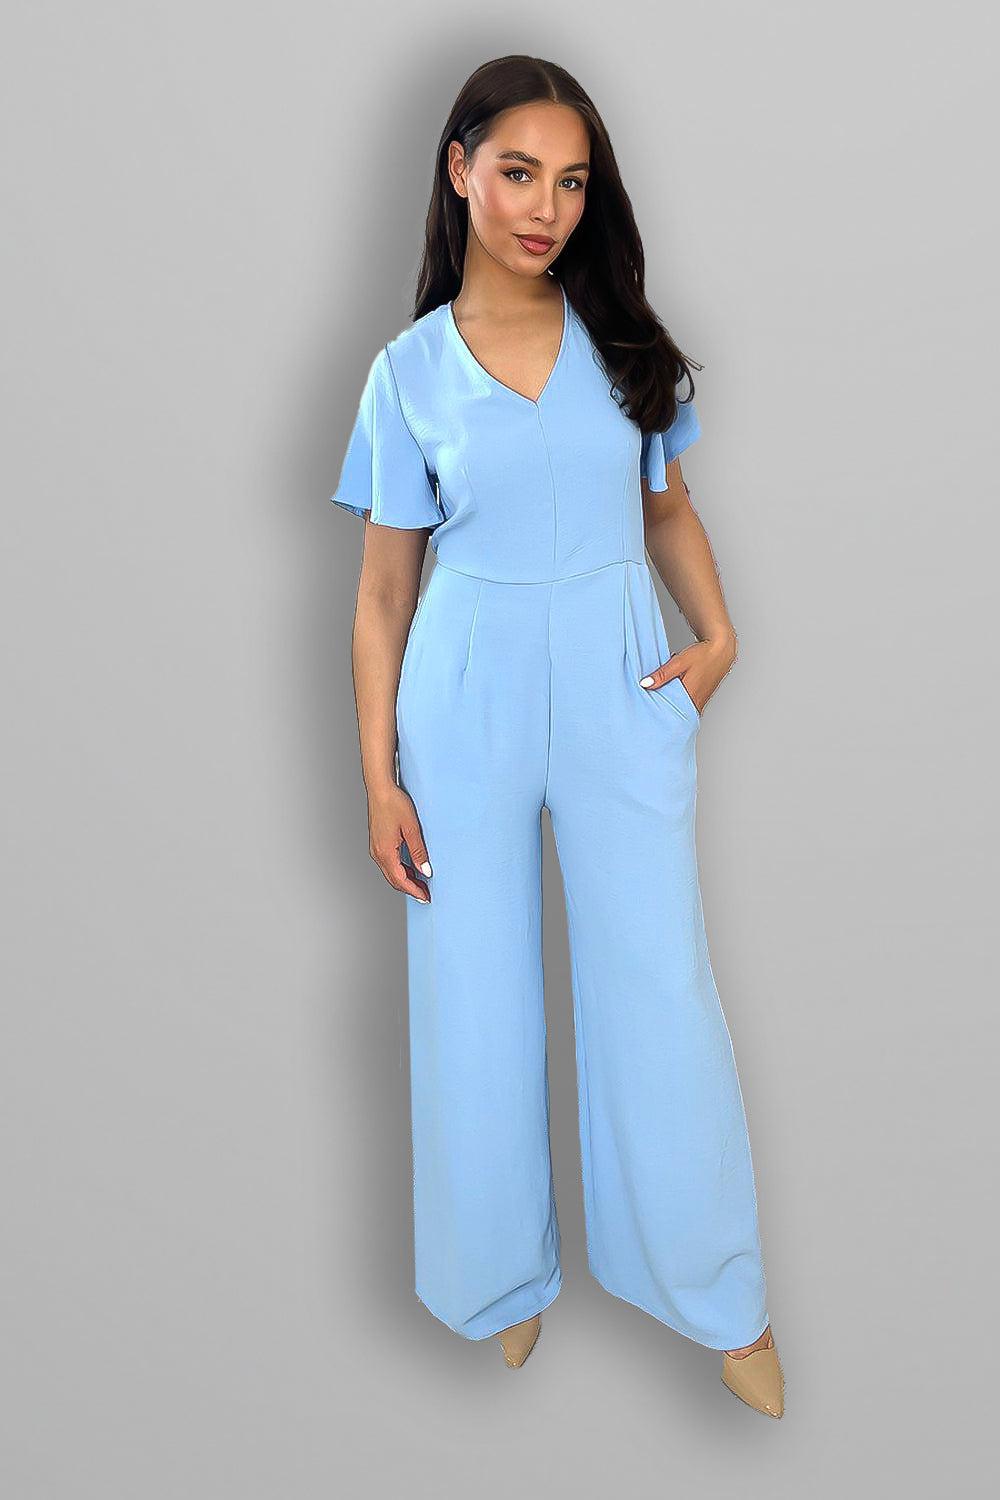 Wing Sleeve V-Neck Palazzo Jumpsuit